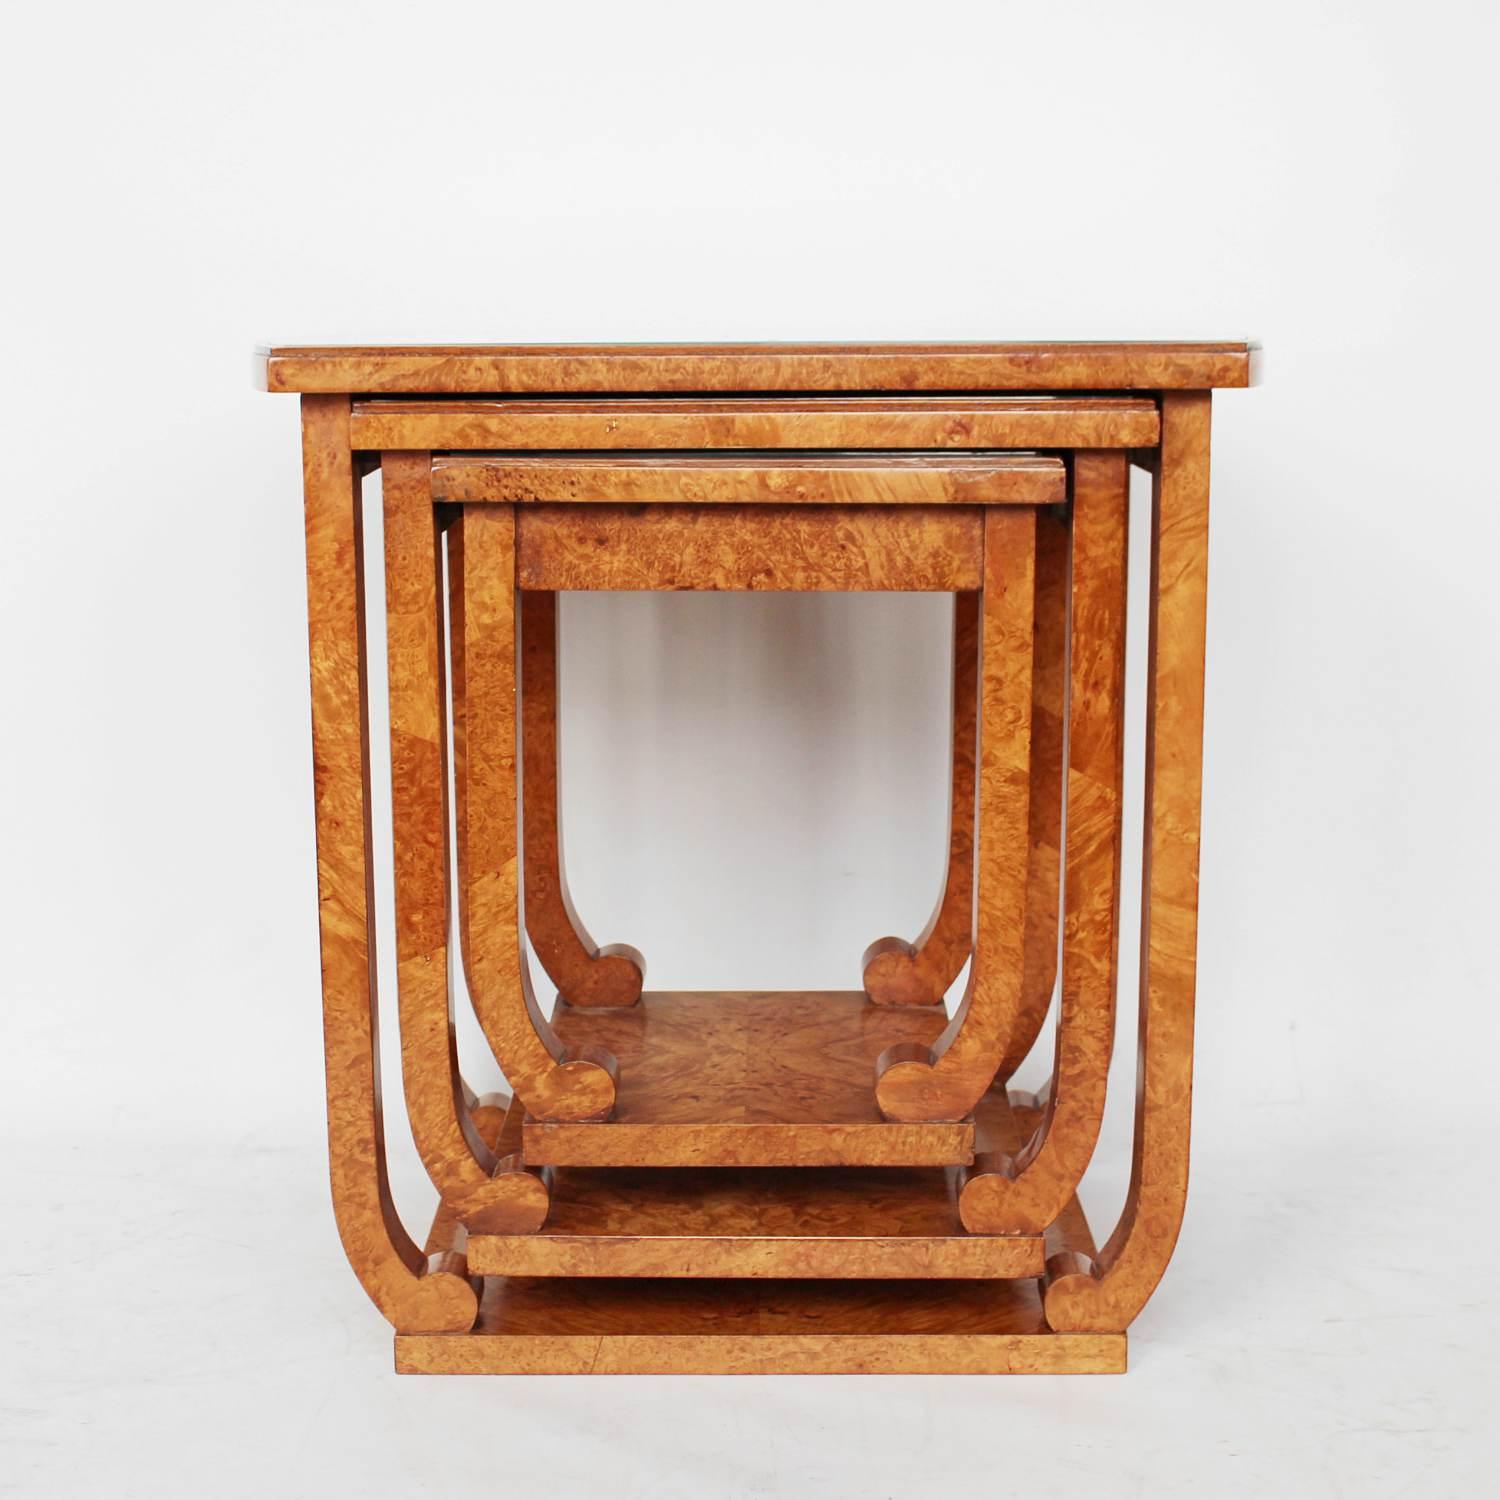 An Art Deco nest of hanging side tables with inset glass tops. Set over legs with scrolled feet on squared bases. Burr walnut throughout. 

Dimensions: H 56.5 cm, W 56.5 cm, D 38 cm, H 47.5 cm, W 41 cm, D 34.5 cm, H 38.5 cm, W 32.5 cm, D 30 cm.

